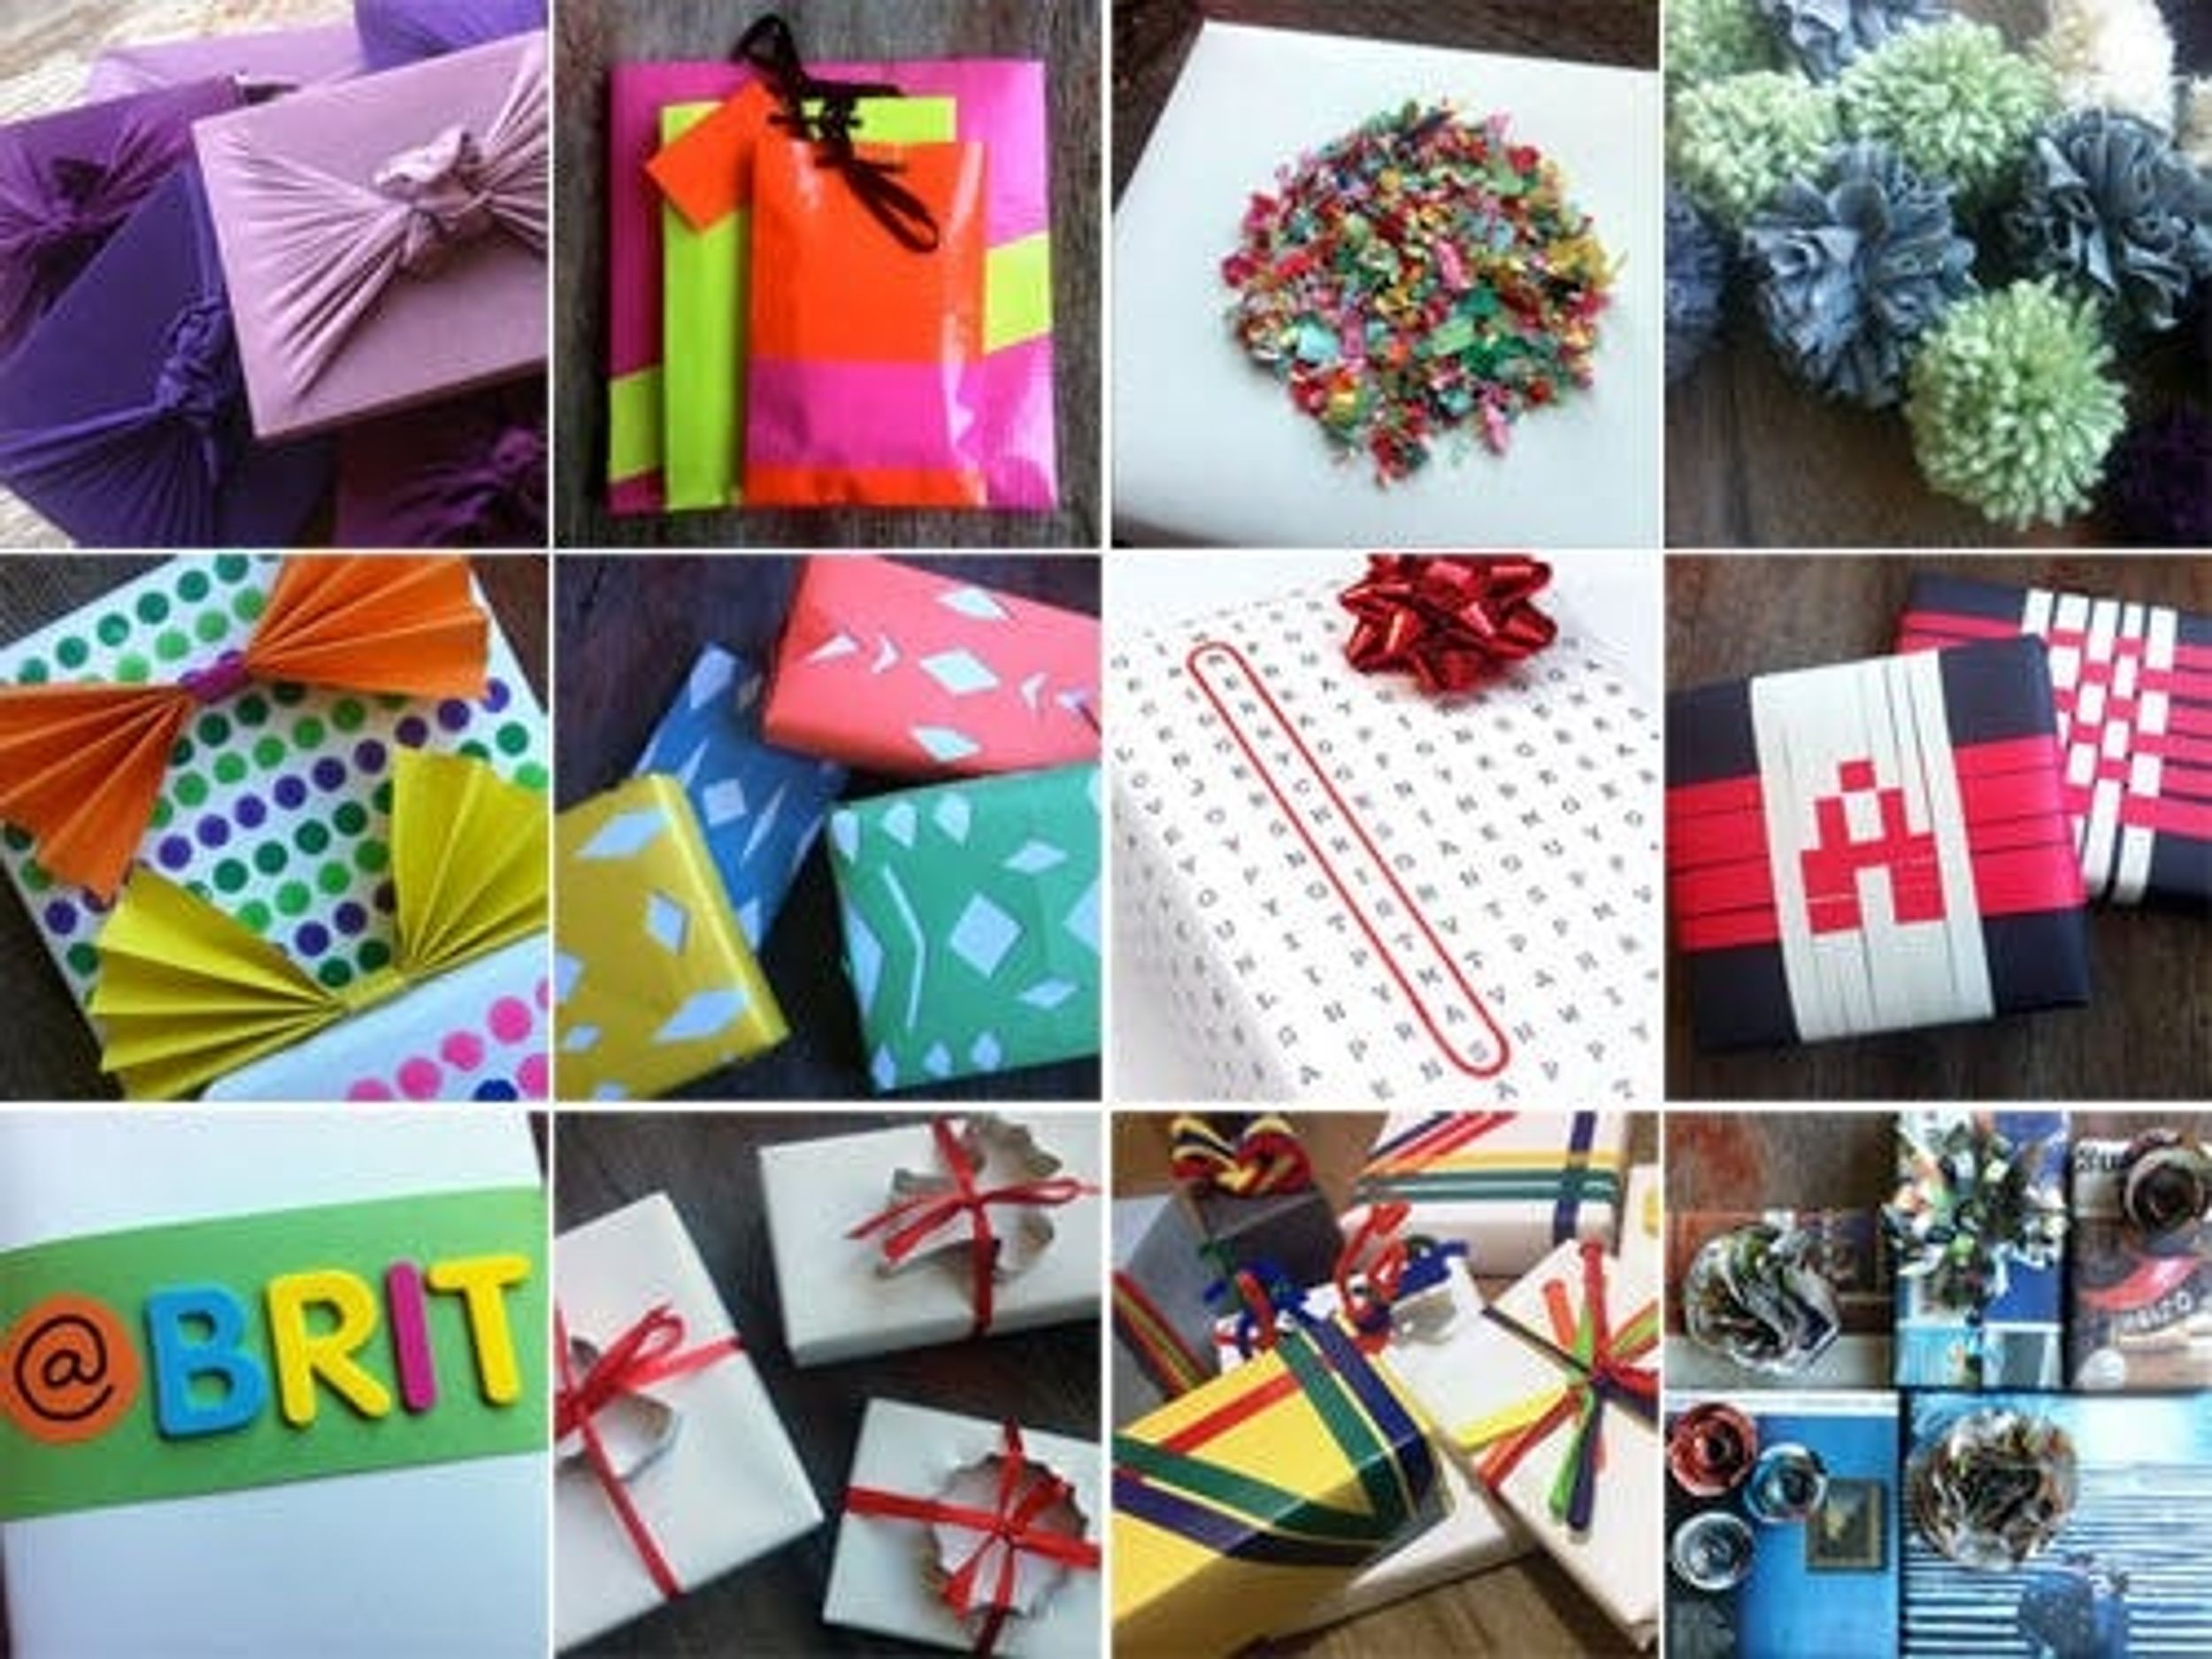 12 Days Of Wrapping: It’s A Wrap!